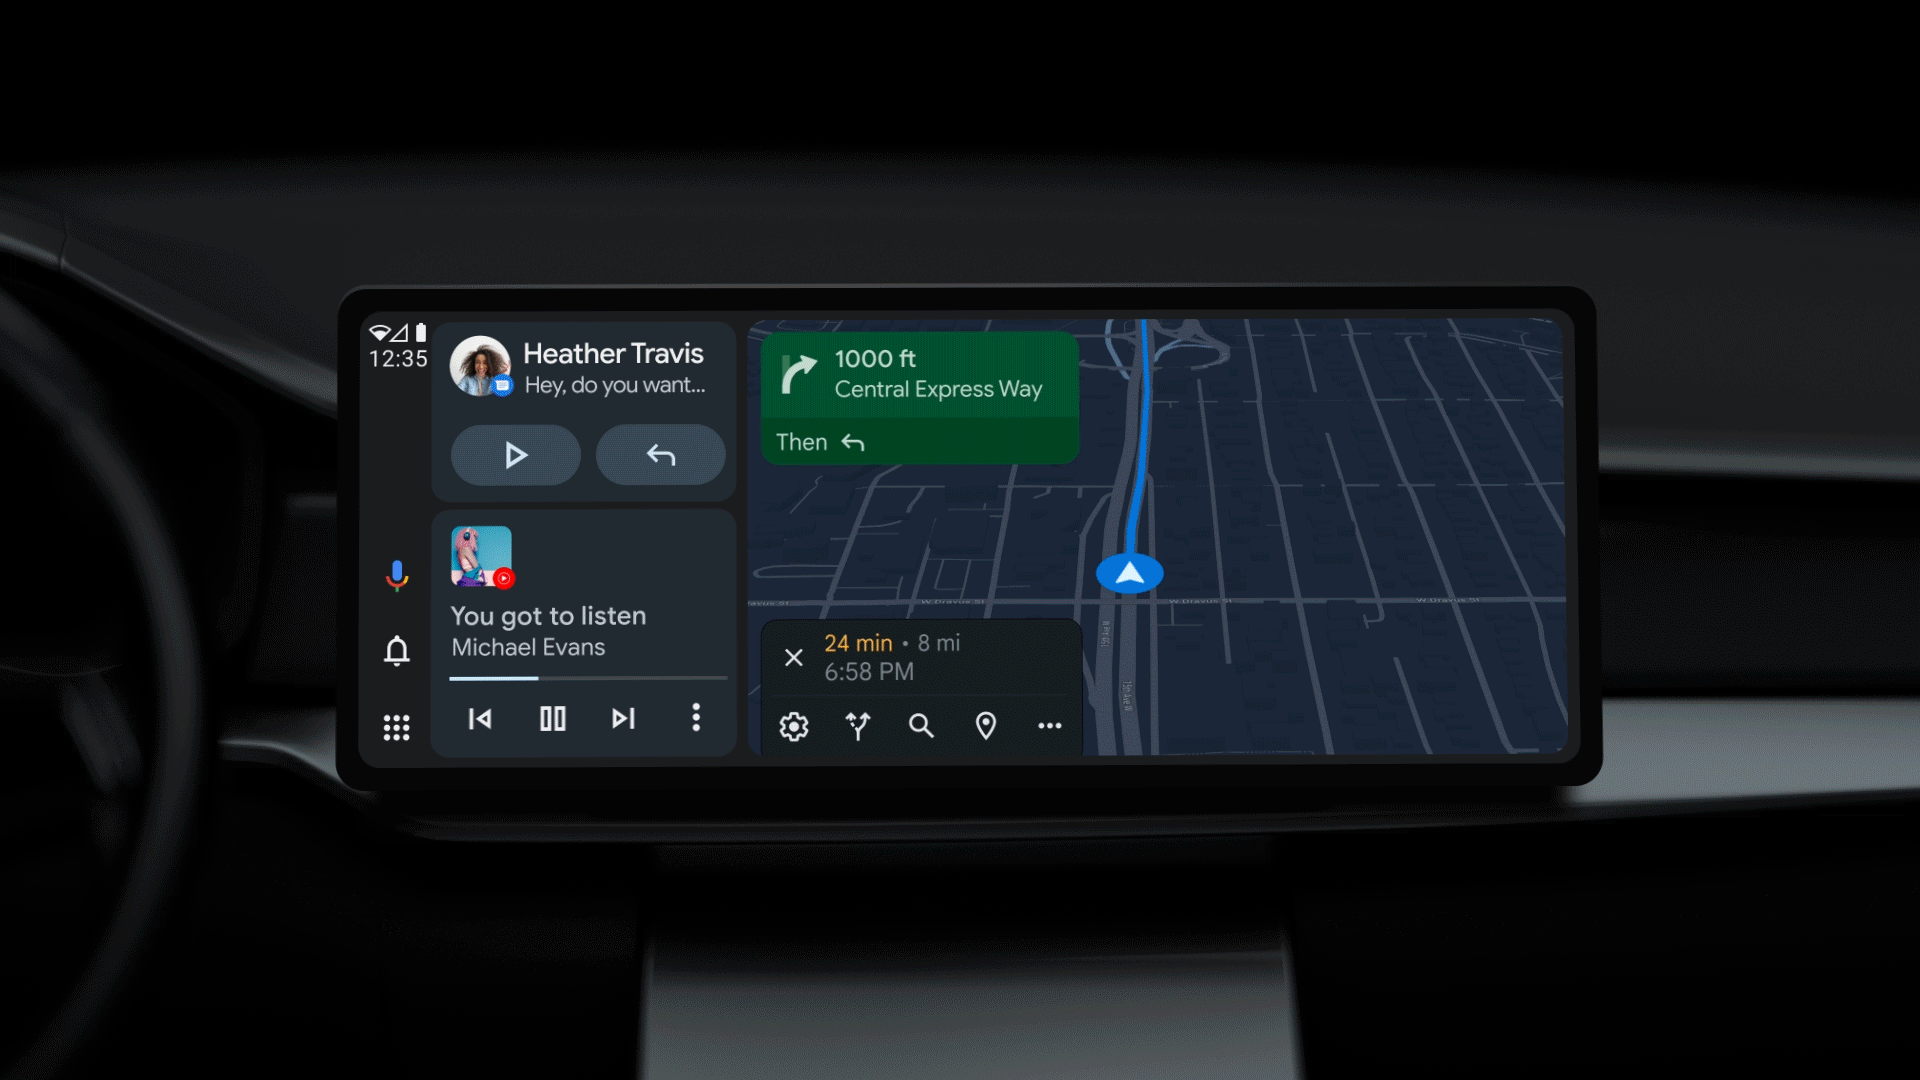 Car dashboard with display showcasing new Android Auto design in different screen sizes